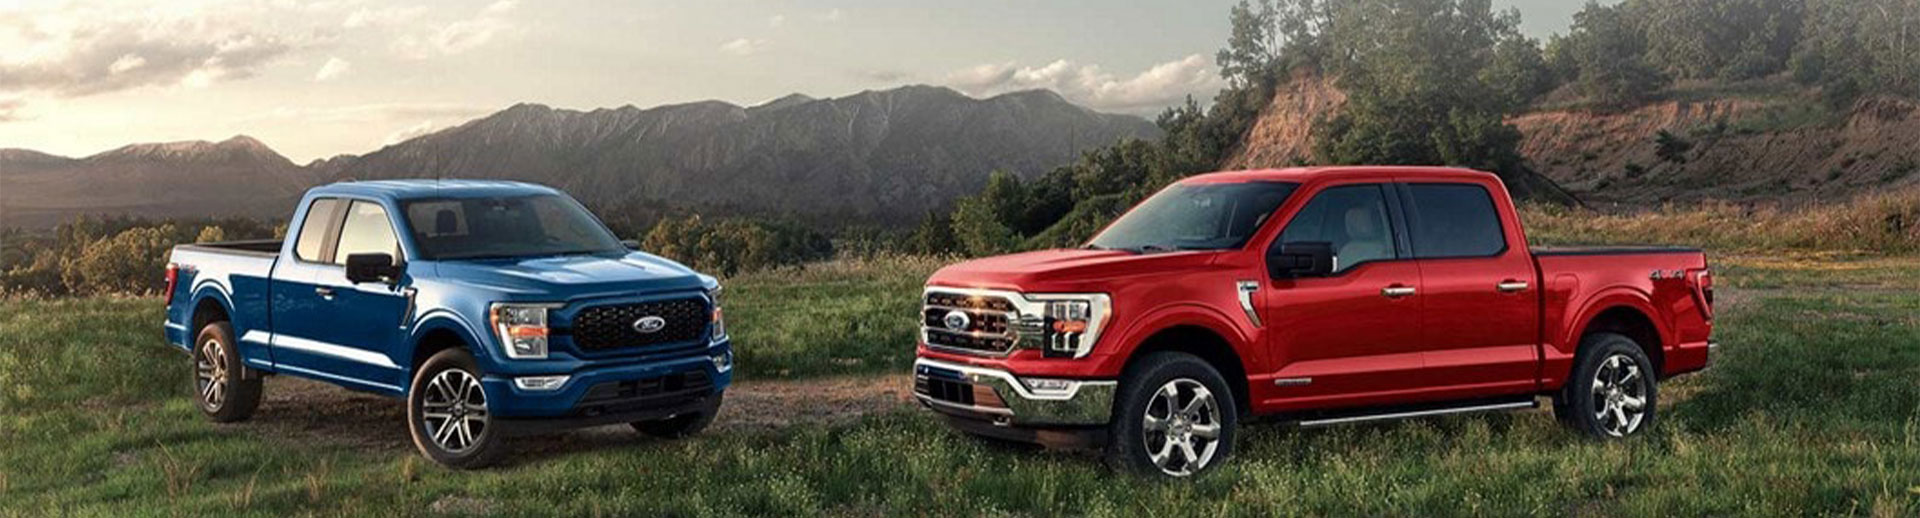 2022 Ford F-150 Lifestyle Photo